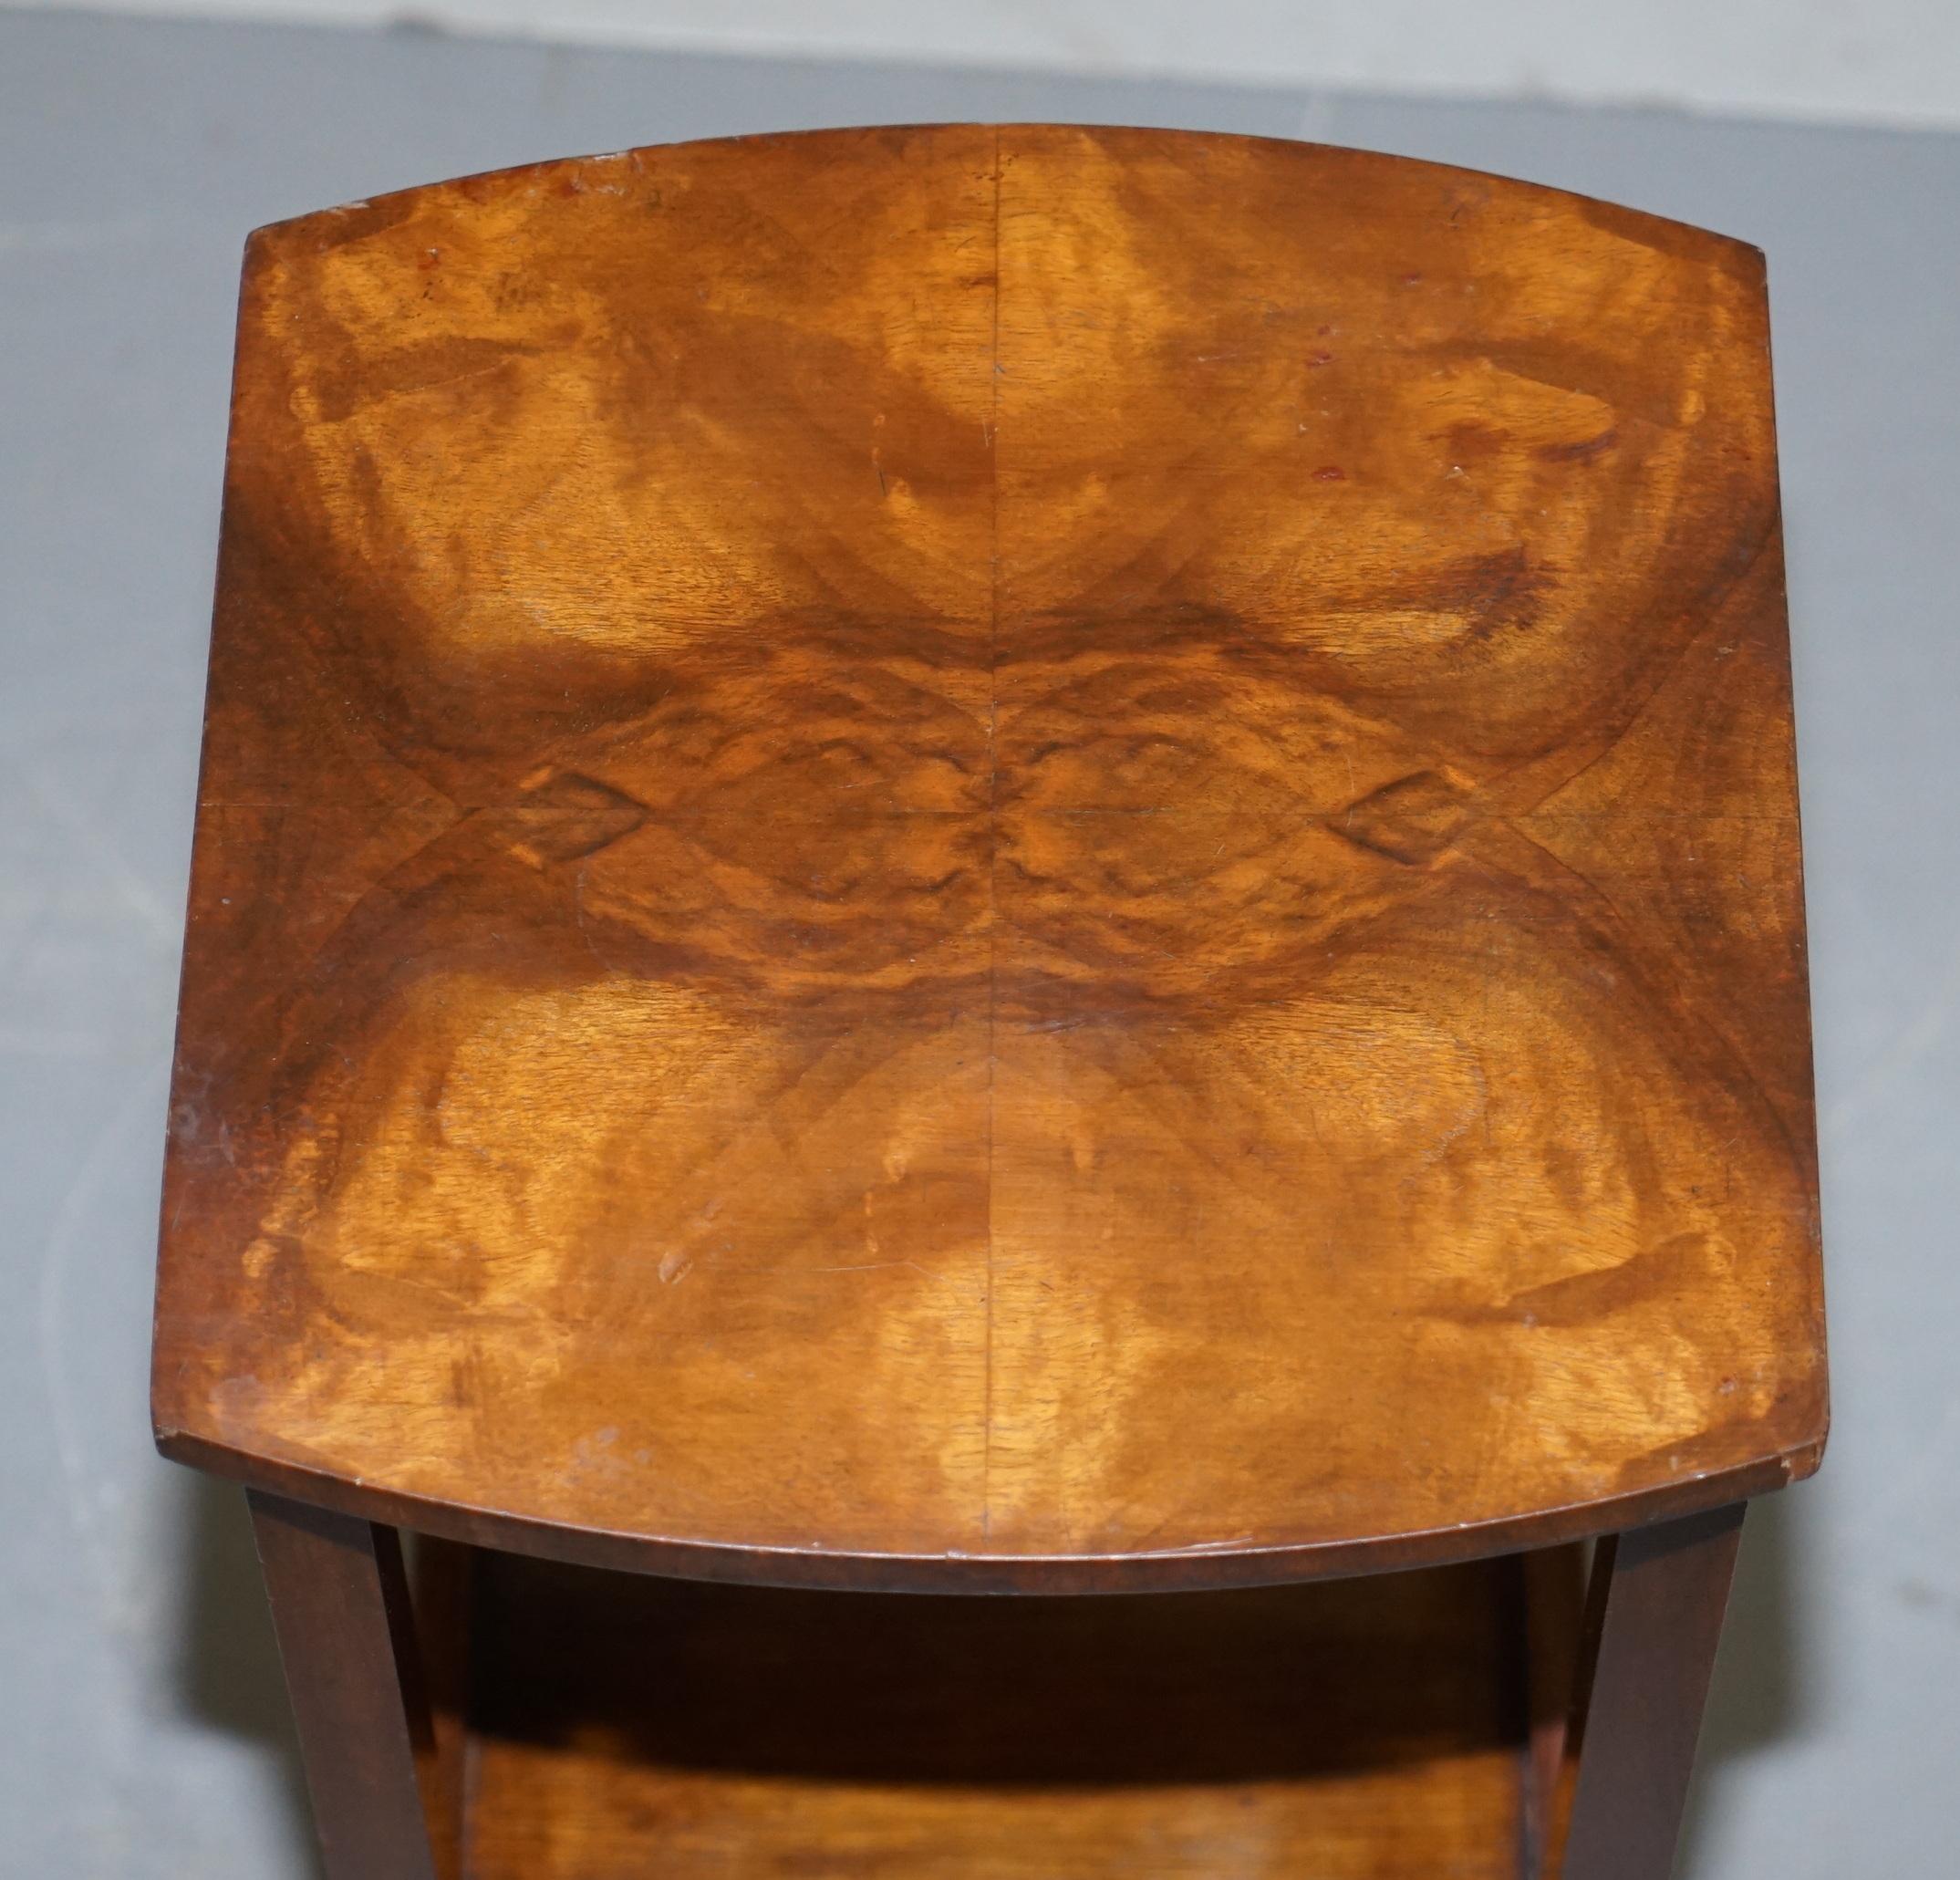 Lovely circa 1900 Late Victorian Burr Walnut Nest of Tables with Oval Main Piece For Sale 11